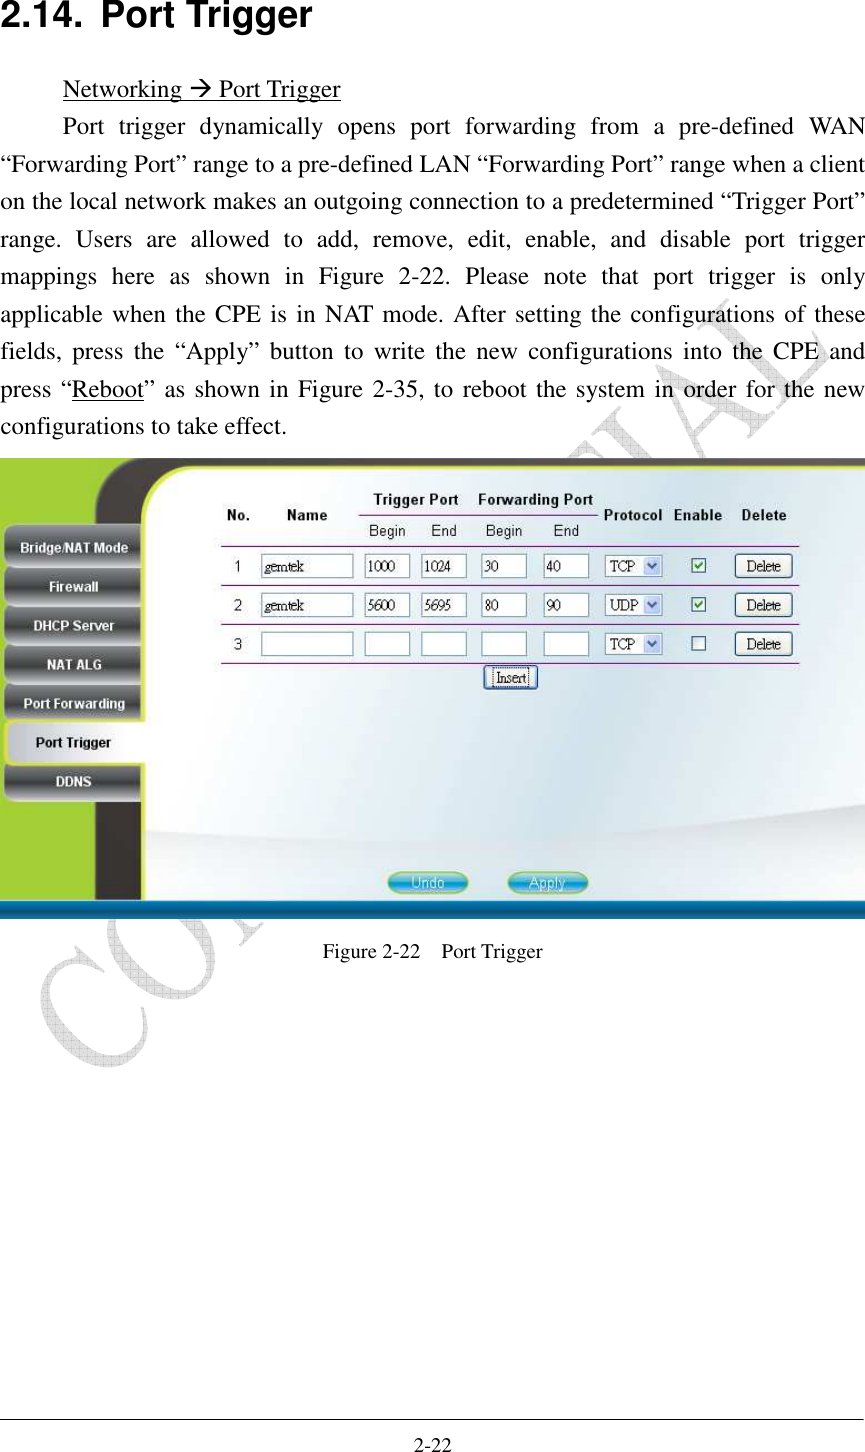    2-22 2.14.  Port Trigger Networking  Port Trigger Port  trigger  dynamically  opens  port  forwarding  from  a  pre-defined  WAN “Forwarding Port” range to a pre-defined LAN “Forwarding Port” range when a client on the local network makes an outgoing connection to a predetermined “Trigger Port” range.  Users  are  allowed  to  add,  remove,  edit,  enable,  and  disable  port  trigger mappings  here  as  shown  in  Figure  2-22.  Please  note  that  port  trigger  is  only applicable when the CPE is in NAT mode. After setting the configurations of these fields,  press  the  “Apply”  button  to  write  the  new  configurations  into the  CPE  and press “Reboot” as shown in Figure 2-35, to reboot the system in order for the new configurations to take effect.  Figure 2-22    Port Trigger  